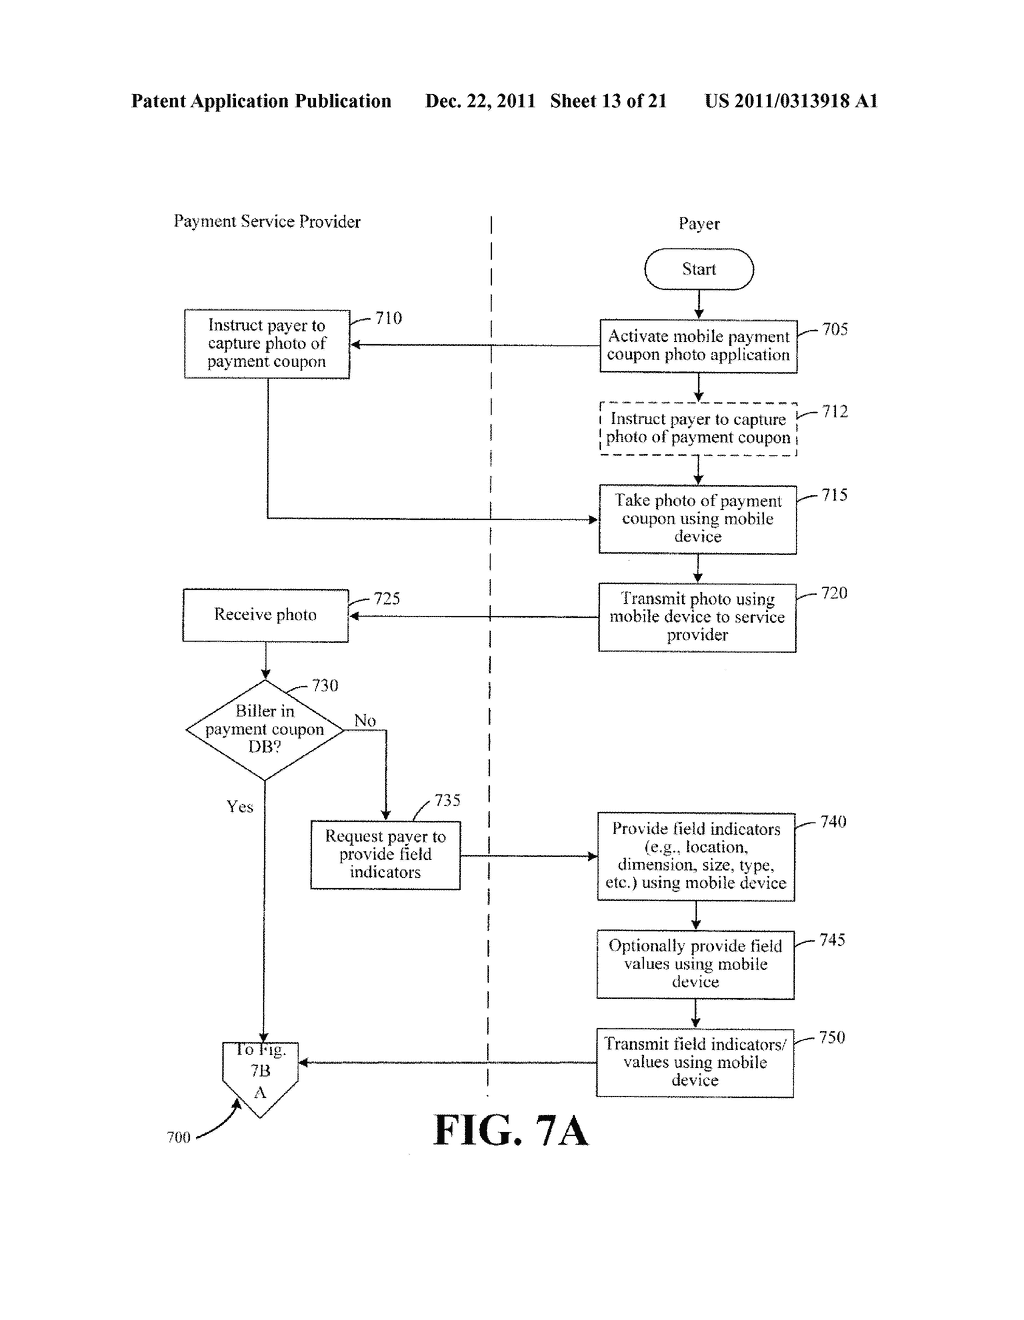 Systems and Methods for Processing a Payment Coupon Image - diagram, schematic, and image 14